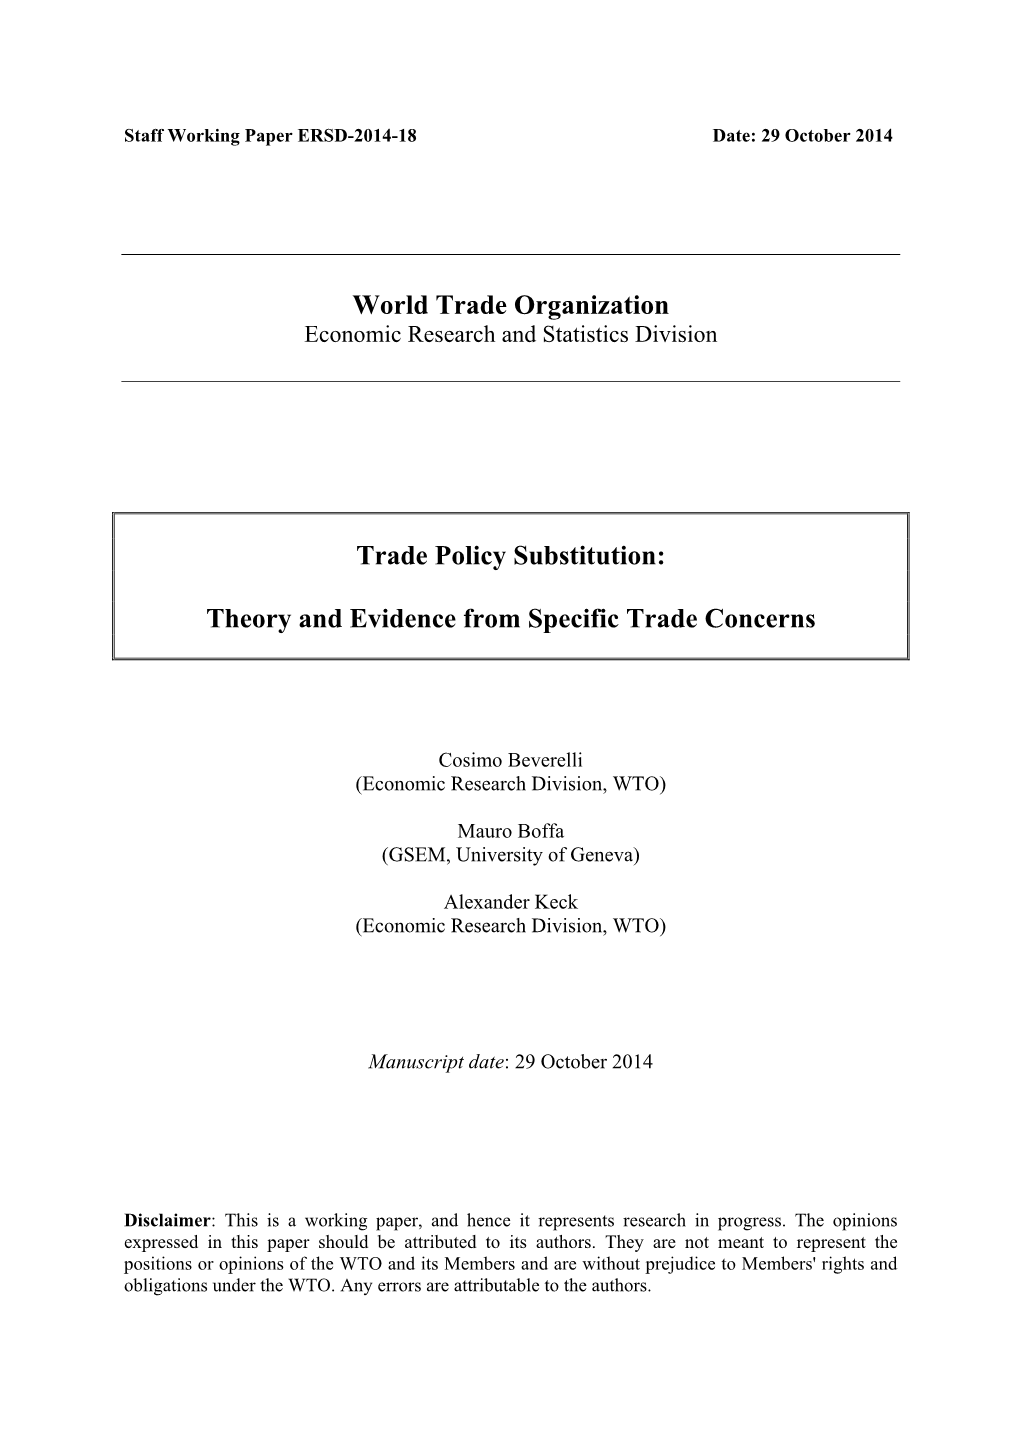 World Trade Organization Trade Policy Substitution: Theory and Evidence from Specific Trade Concerns